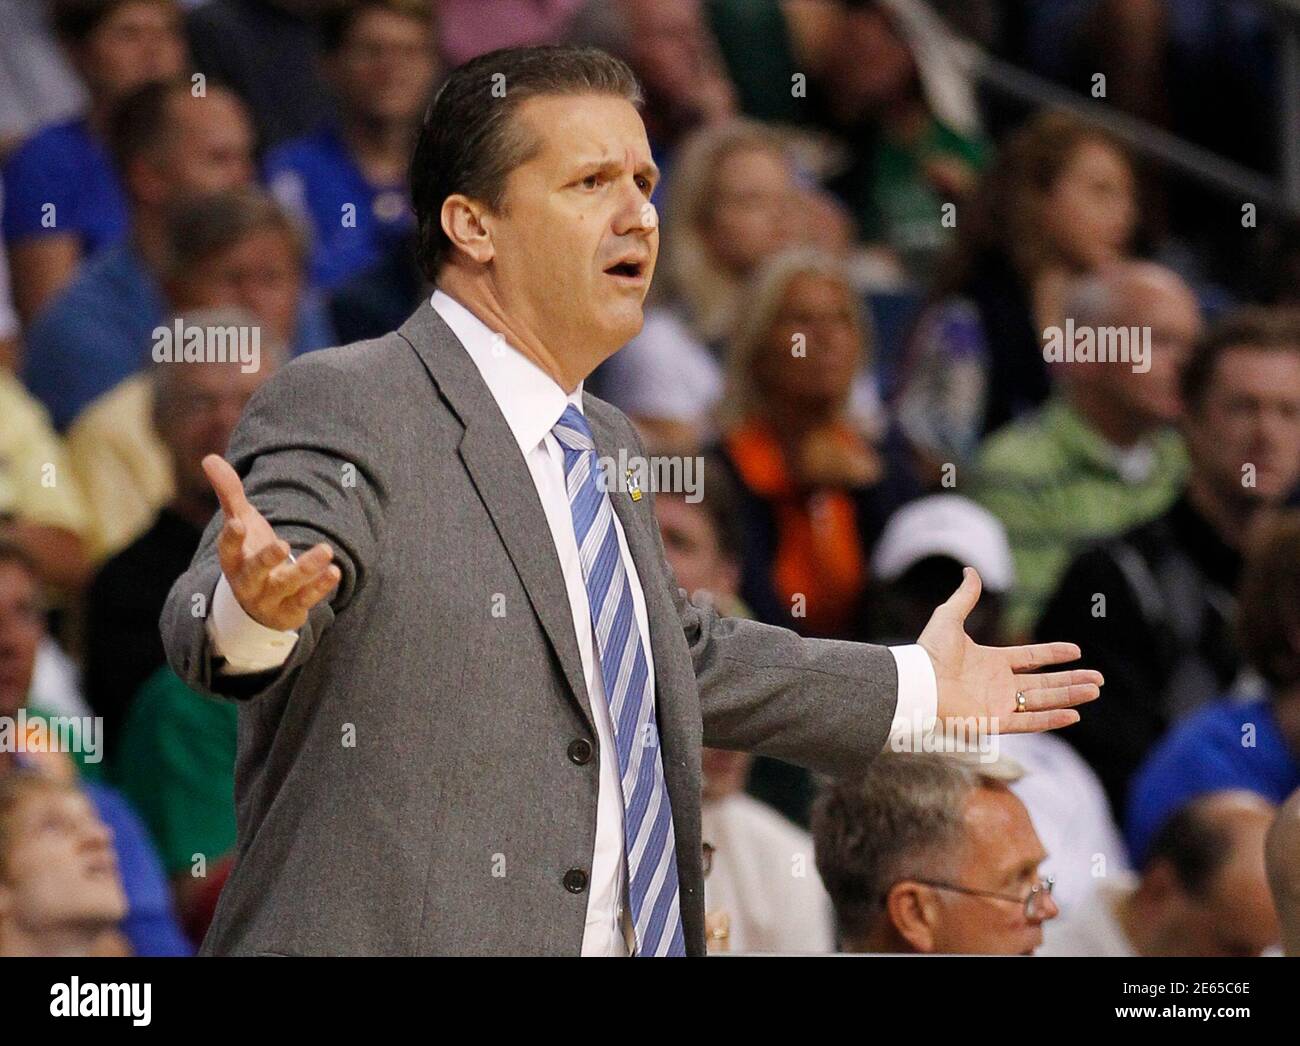 Kentucky Wildcats head coach John Calipari directs his team's play against the Princeton Tigers during their second round NCAA basketball game in Tampa, Florida March 17, 2011. REUTERS/Scott Audette (UNITED STATES - Tags: SPORT BASKETBALL) Stock Photo